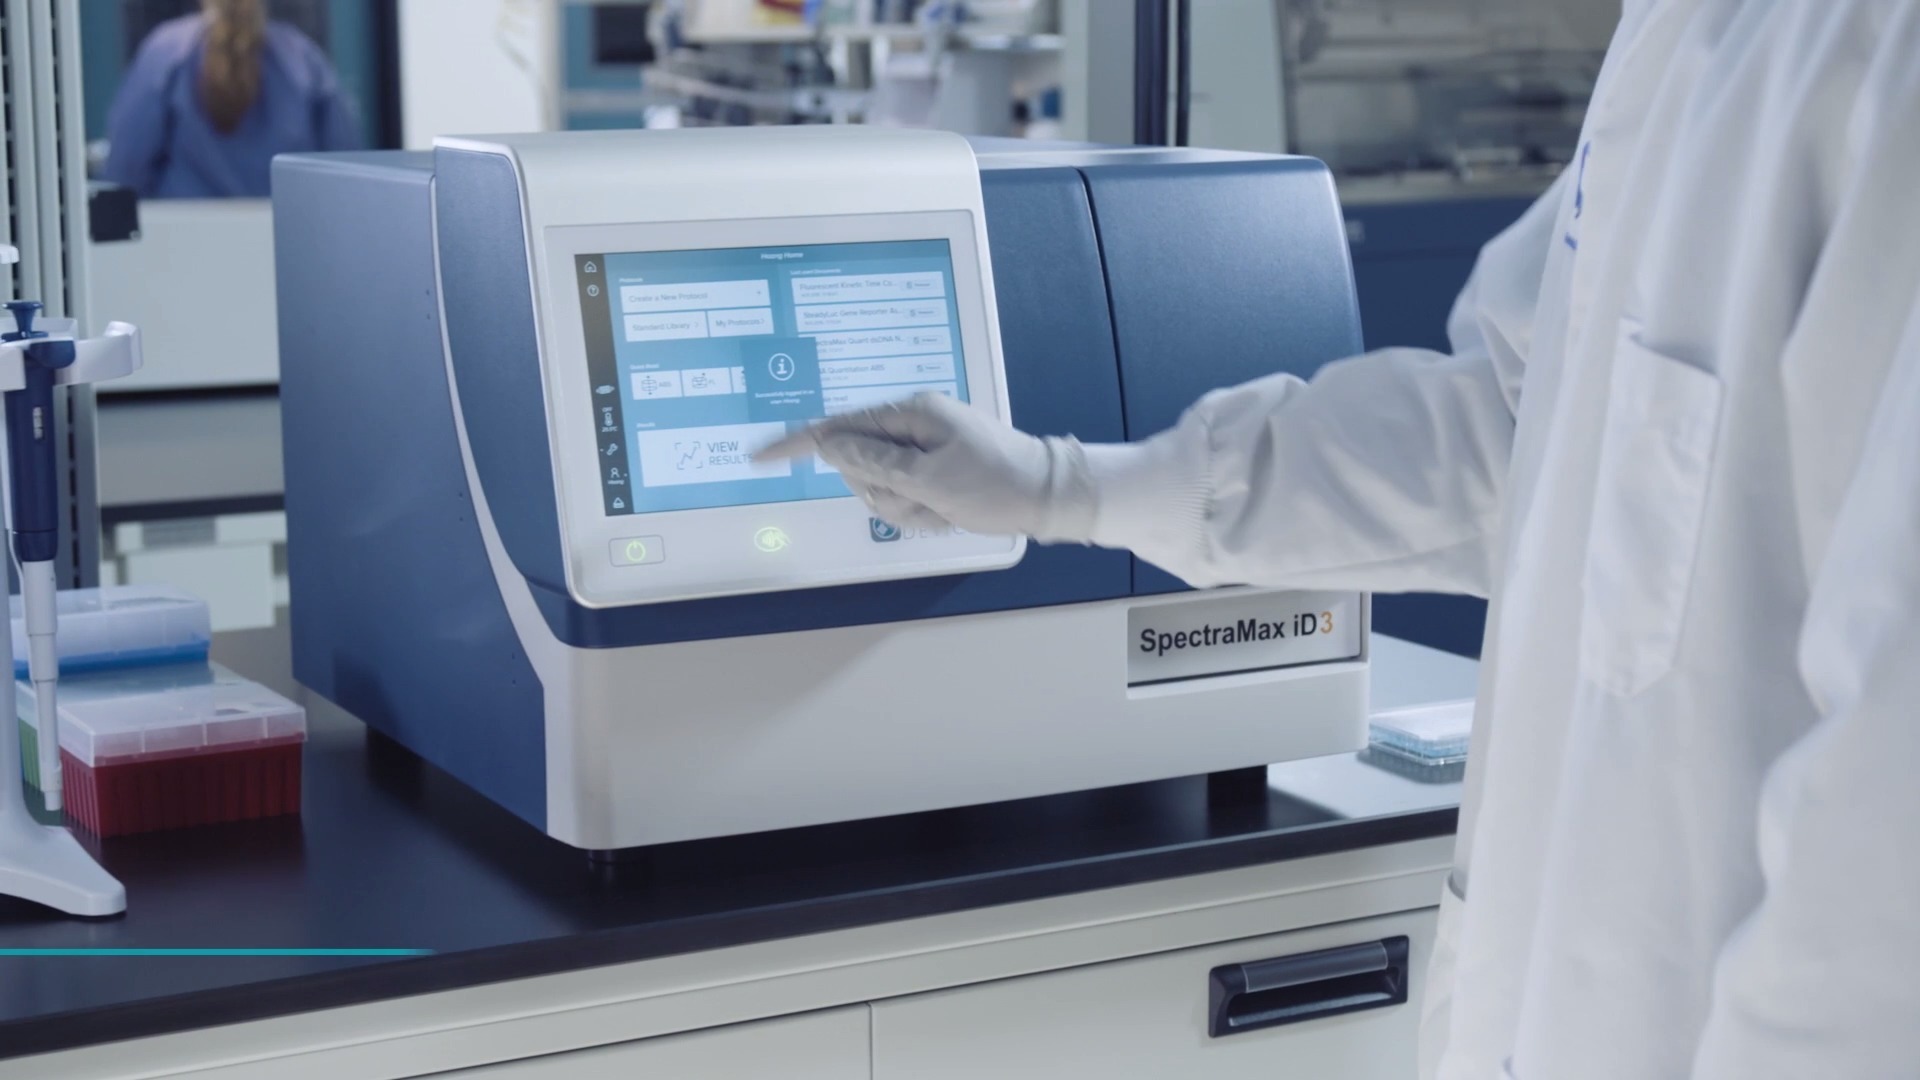 Overview of SpectraMax iD3 Multi-Mode Microplate Reader